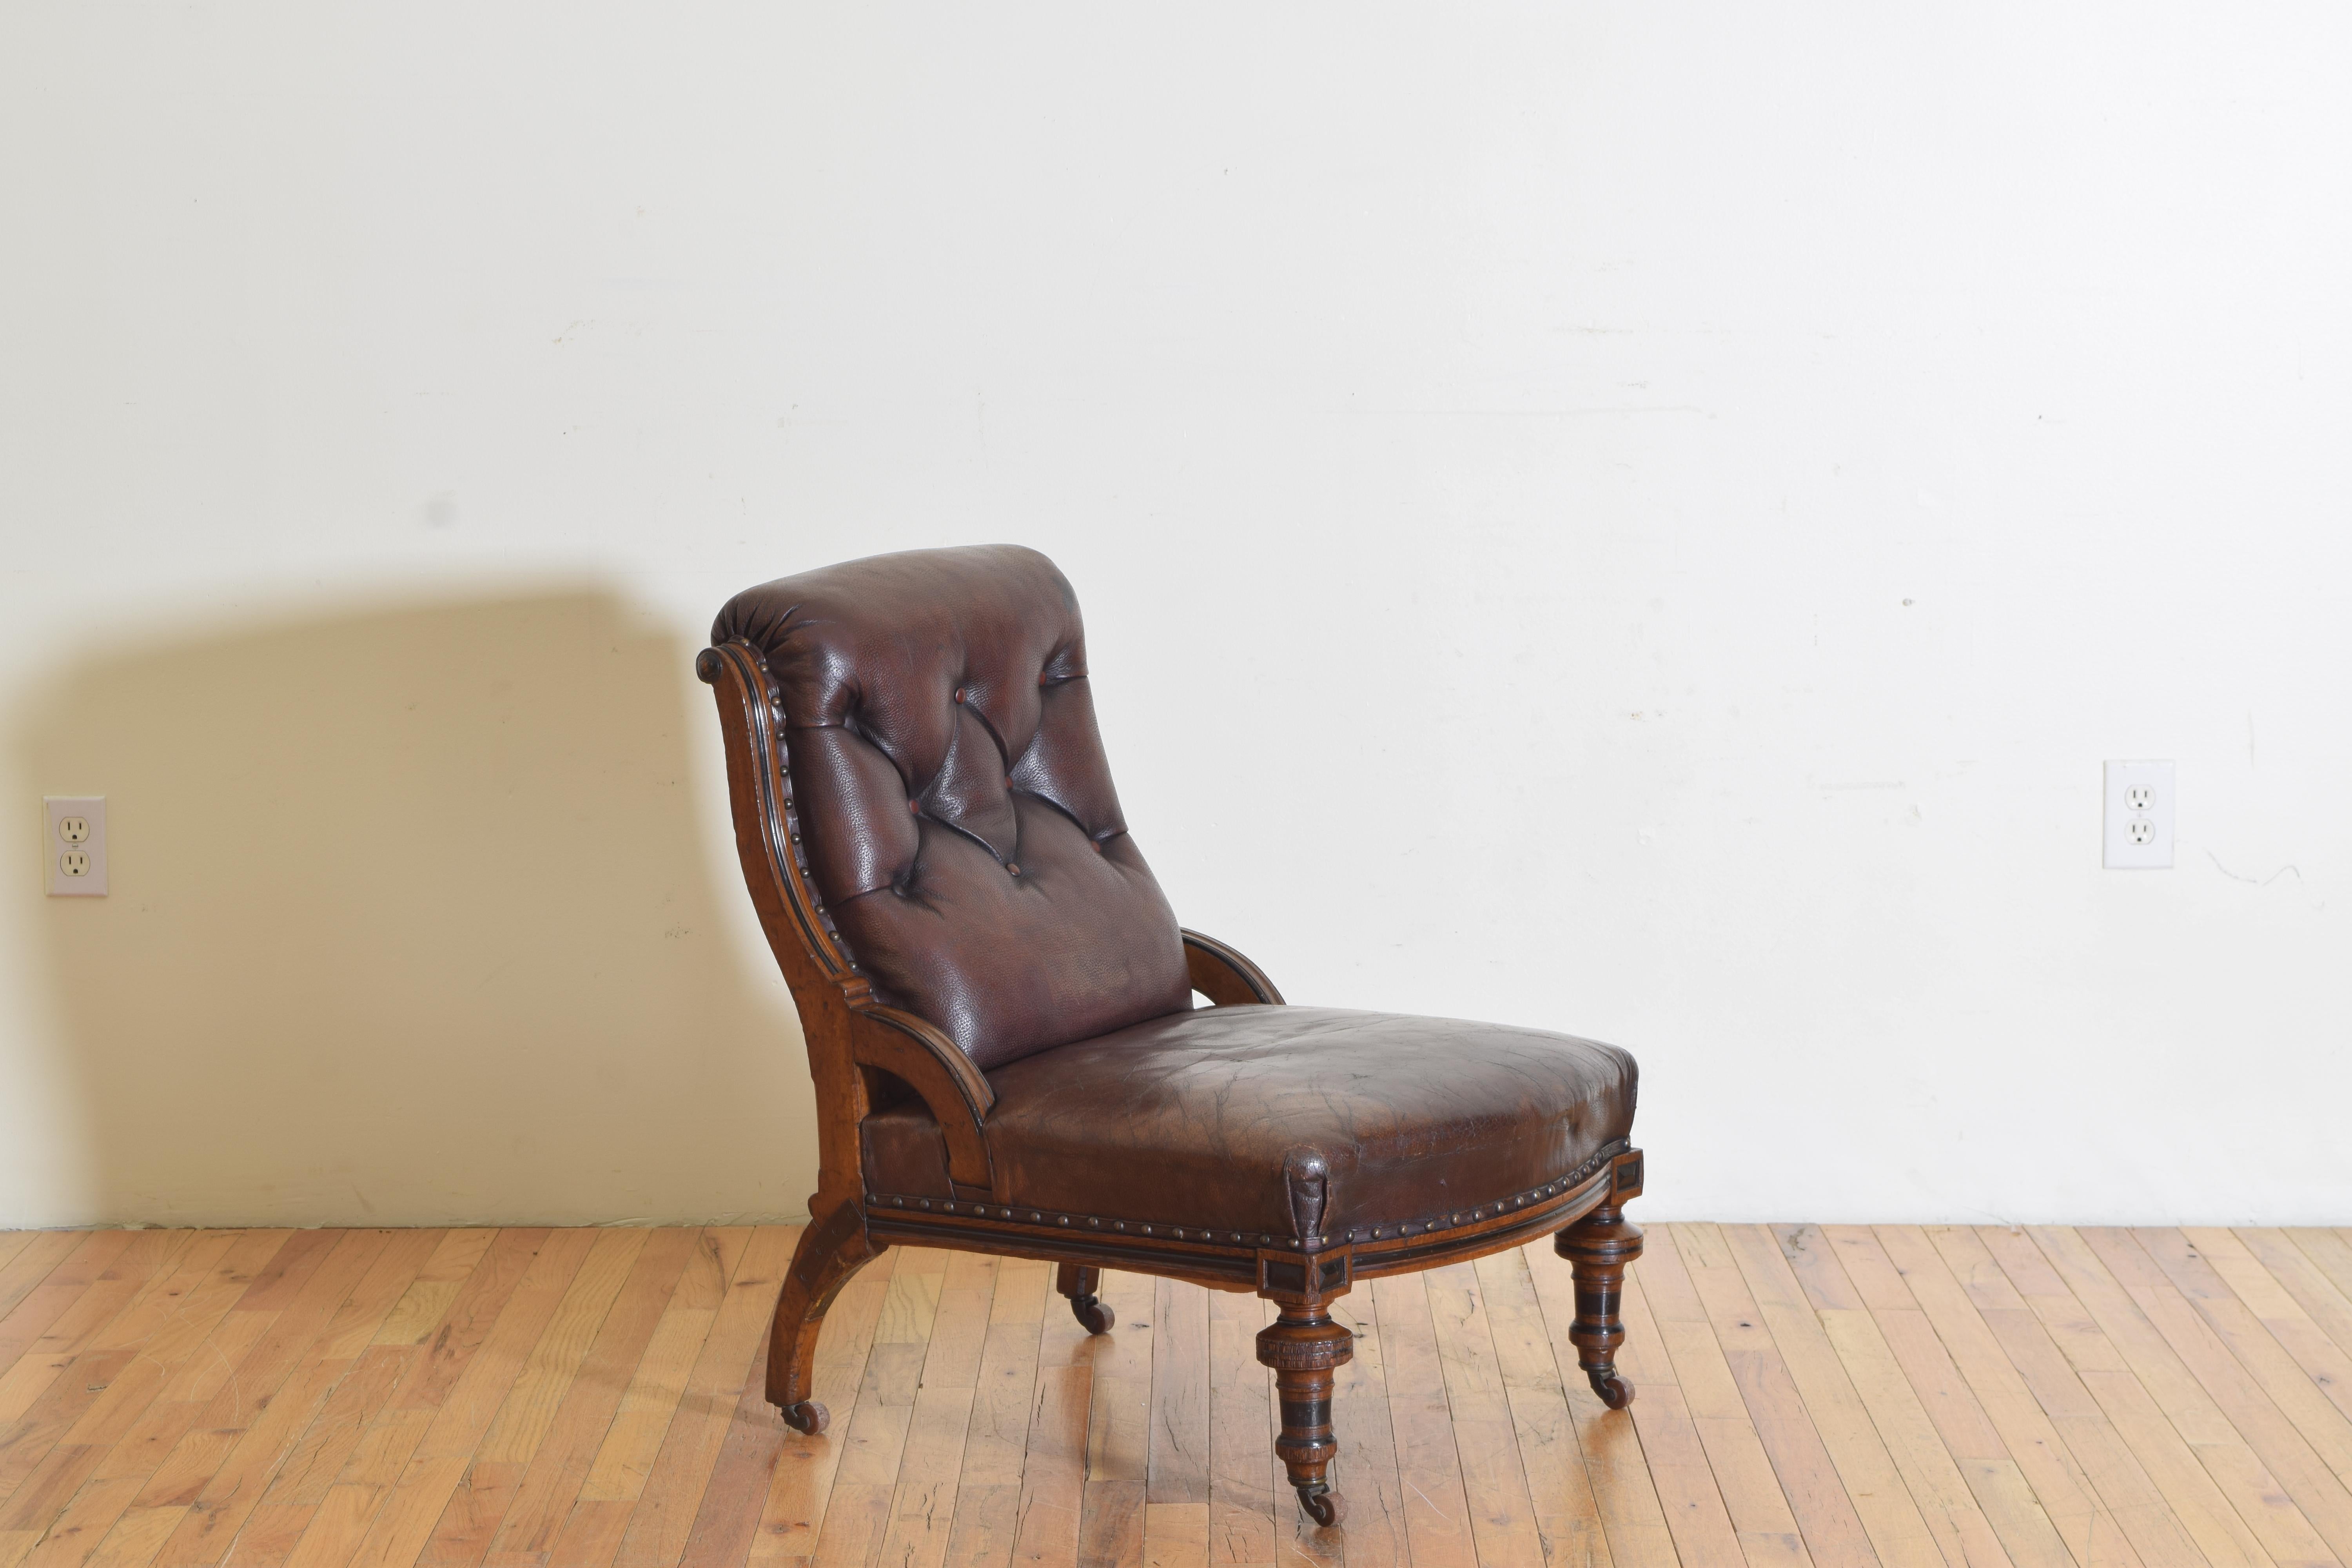 Having button tufted leather upholstery with brass nailhead trim, on block and turned legs and casters, with arched supports joining seat and back with iron bracing at rear splayed legs.